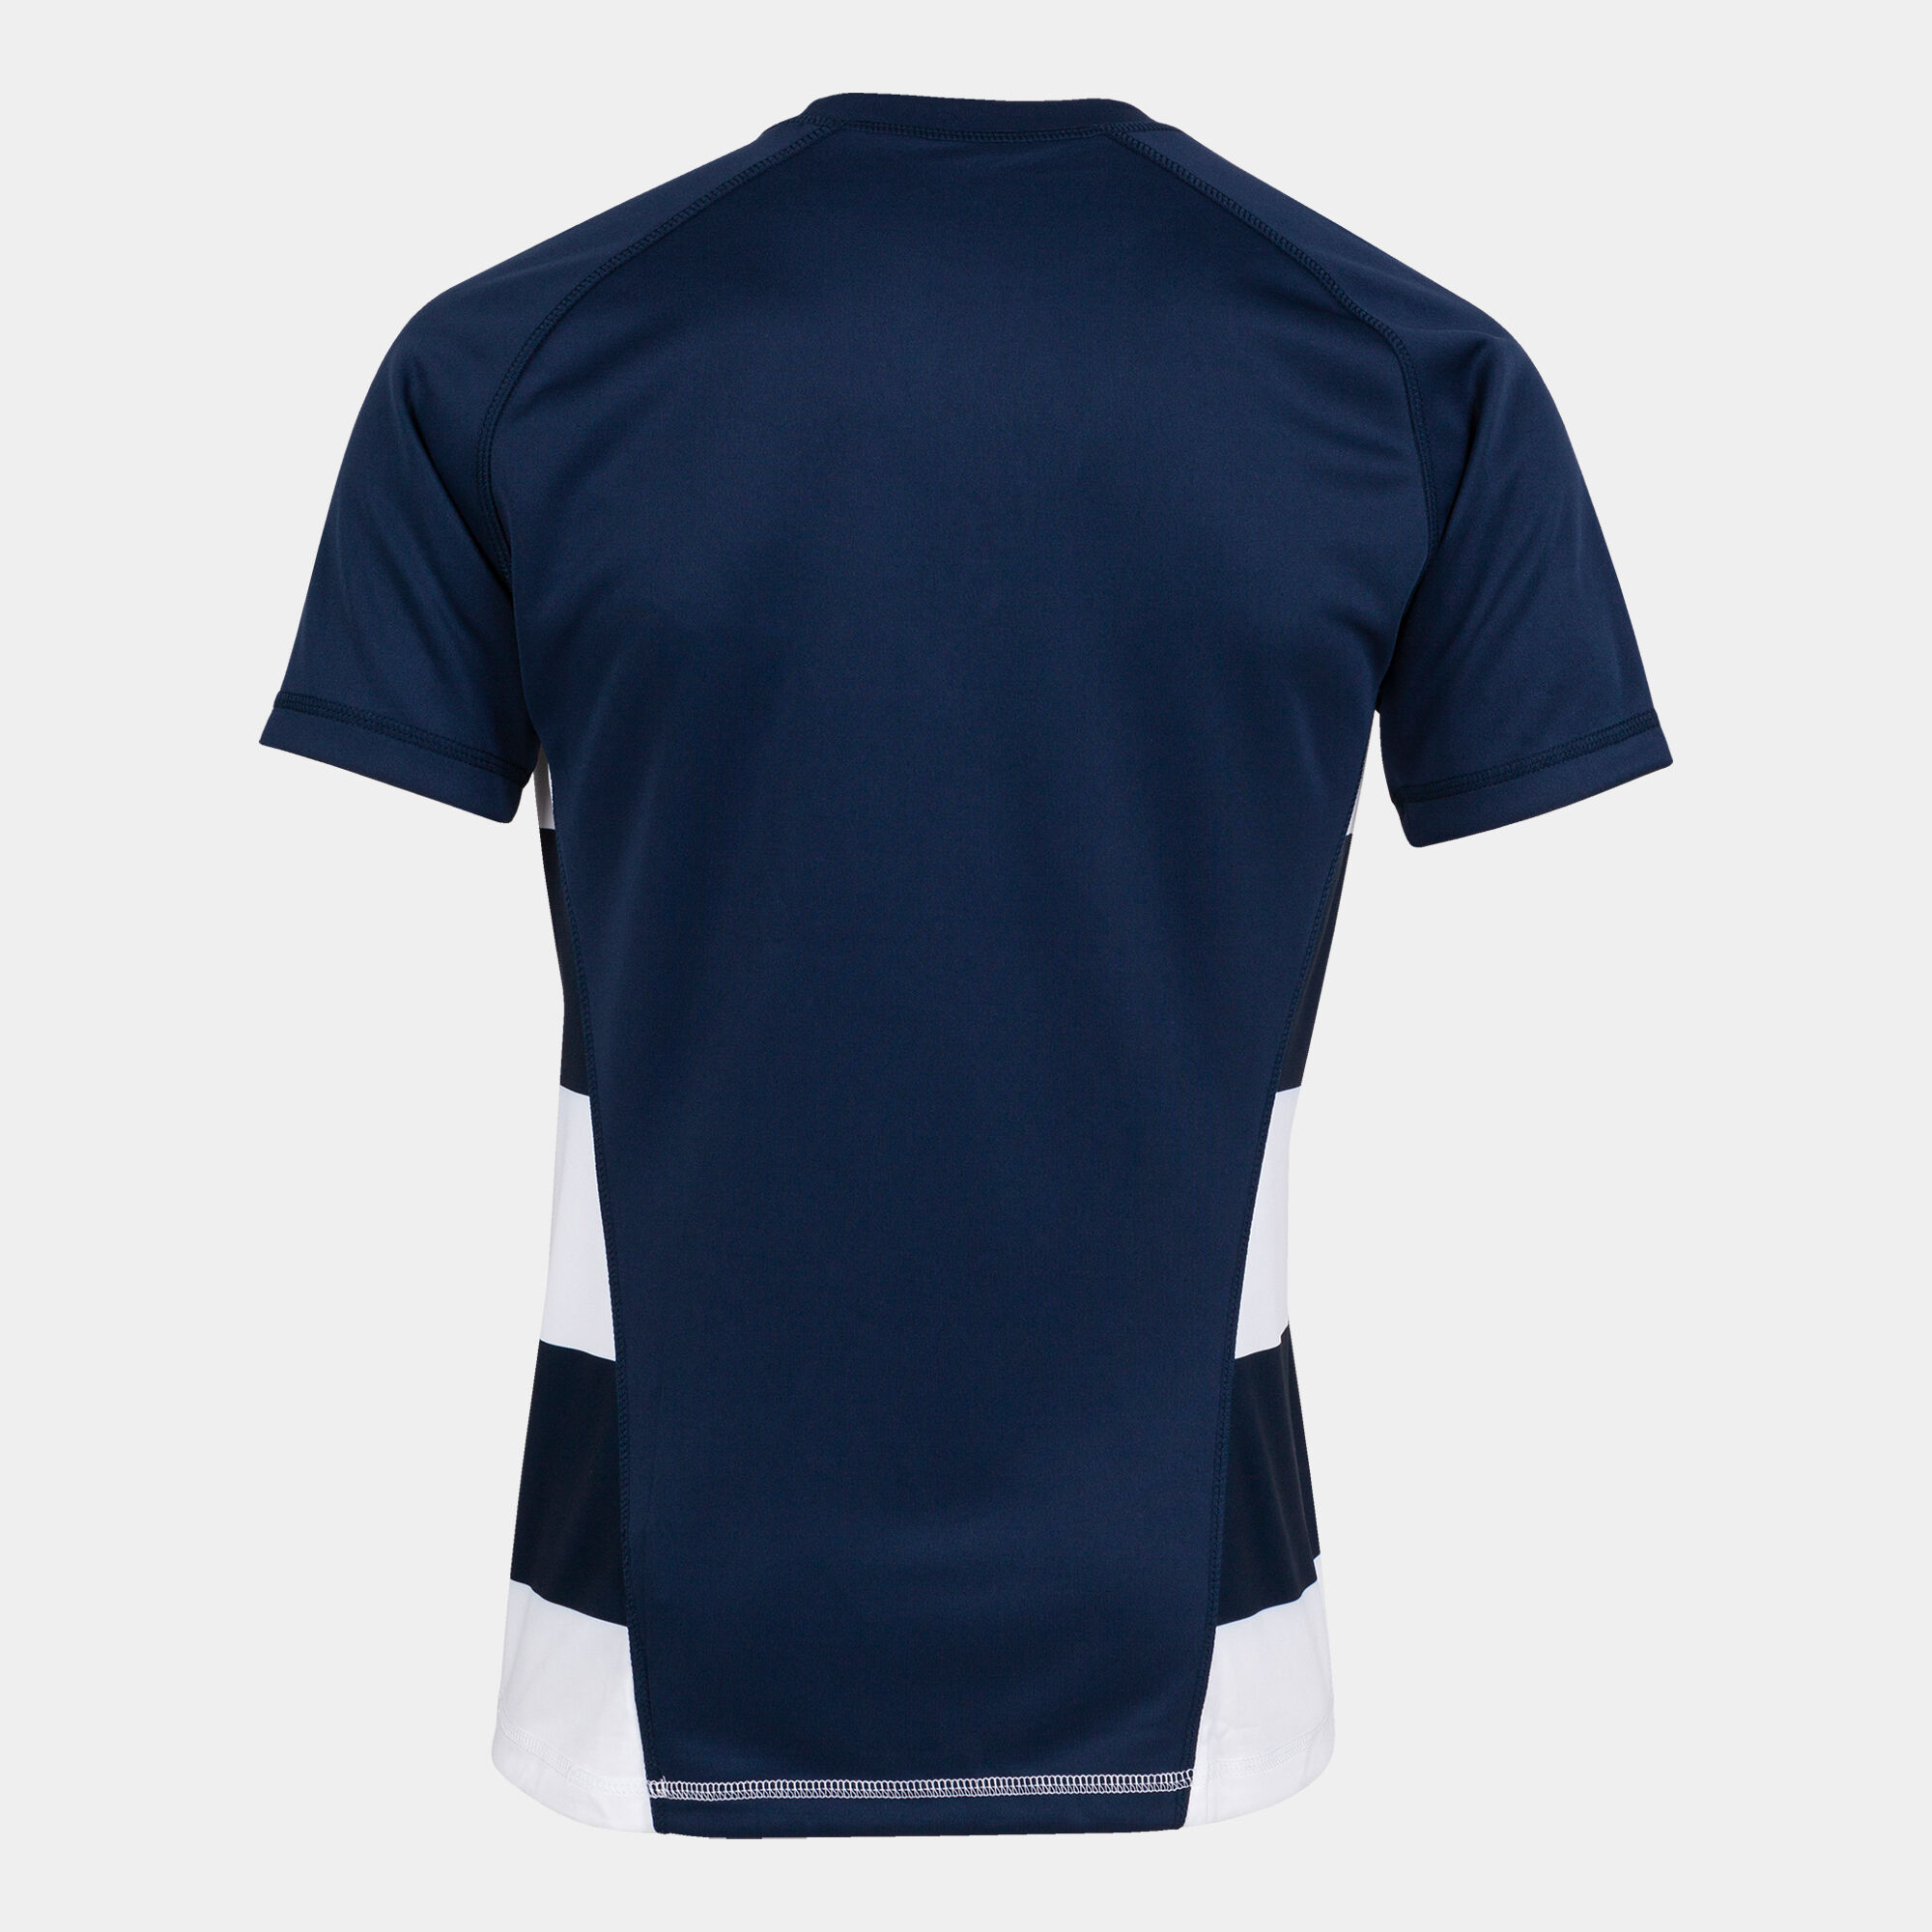 MAILLOT MANCHES COURTES HOMME PRORUGBY II BLEU MARINE BLANC